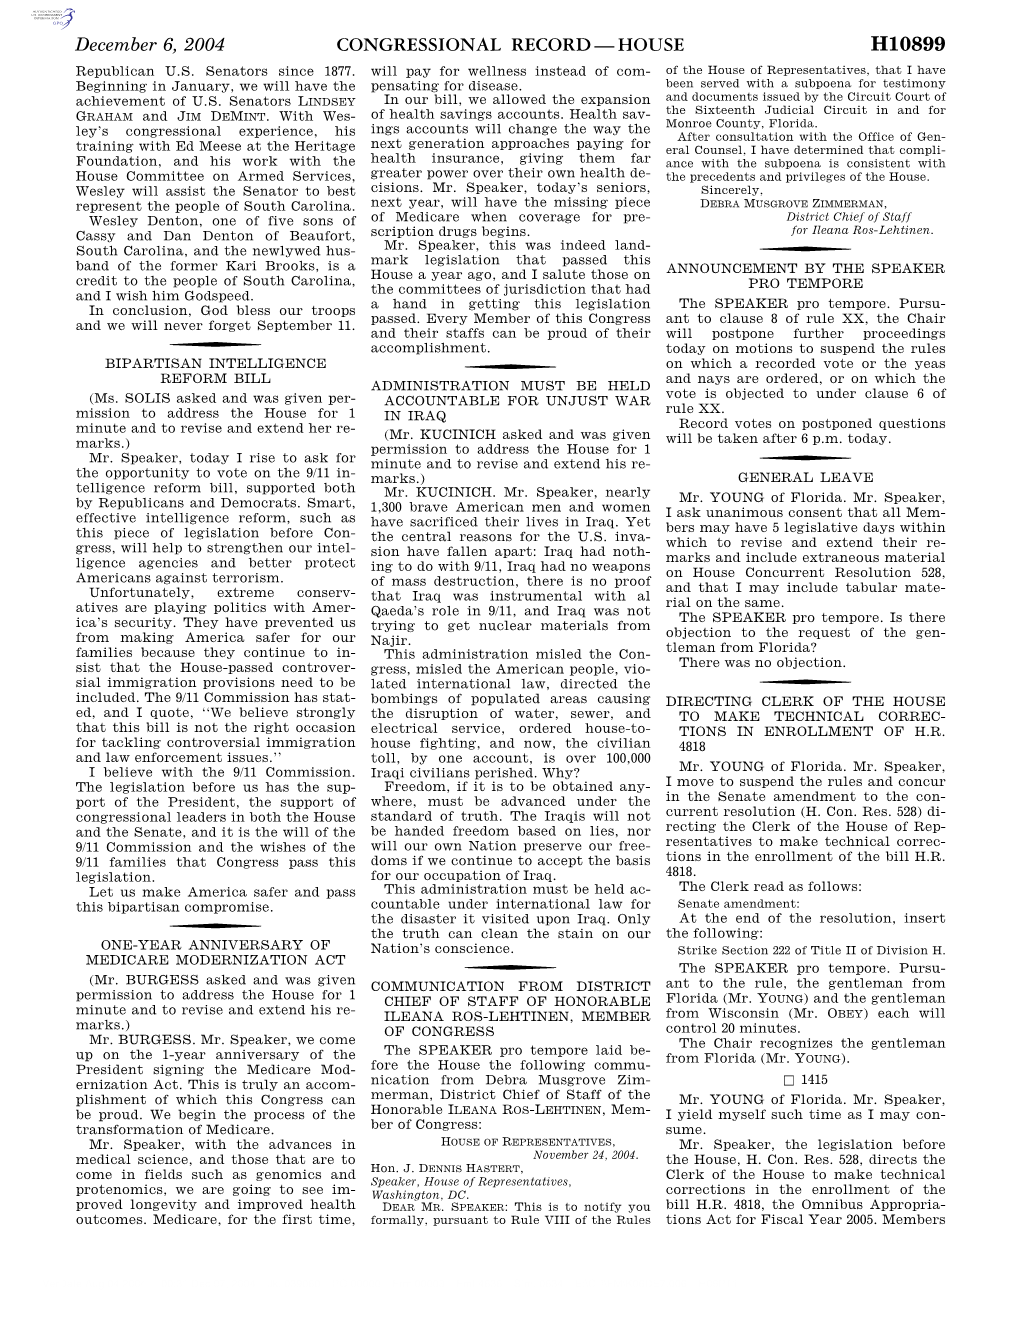 Congressional Record—House H10899